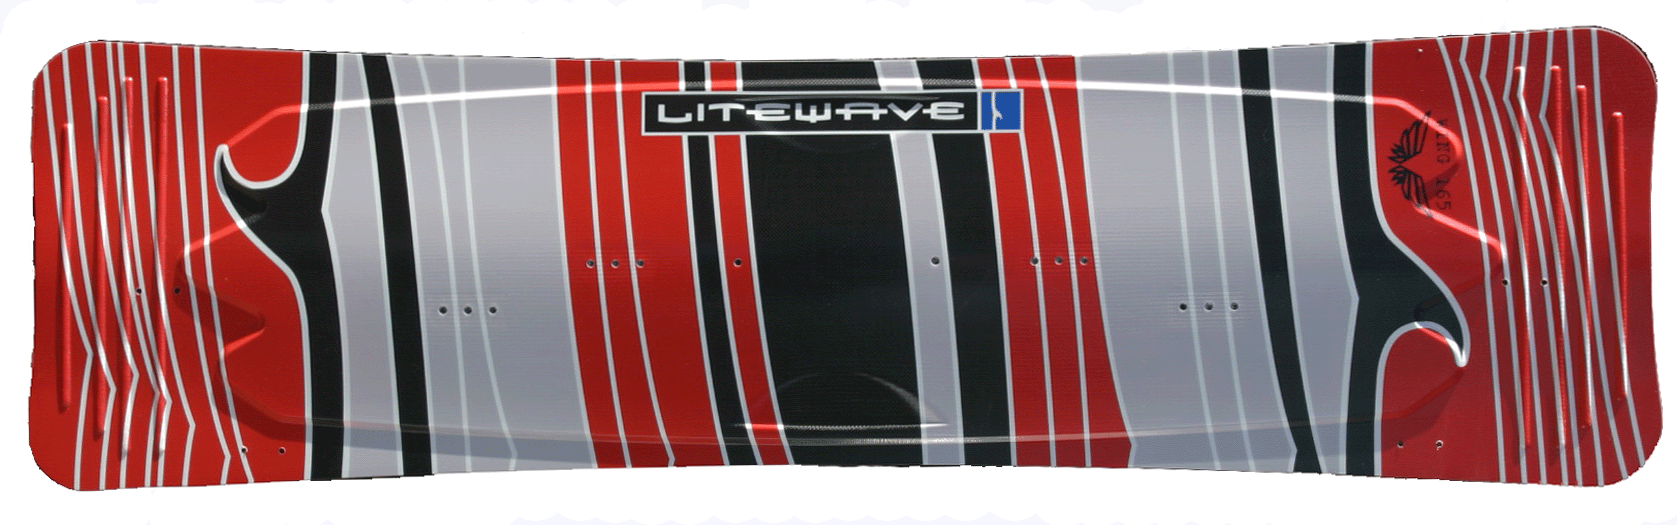 2023 Litewave Wing ADD $99 with straps